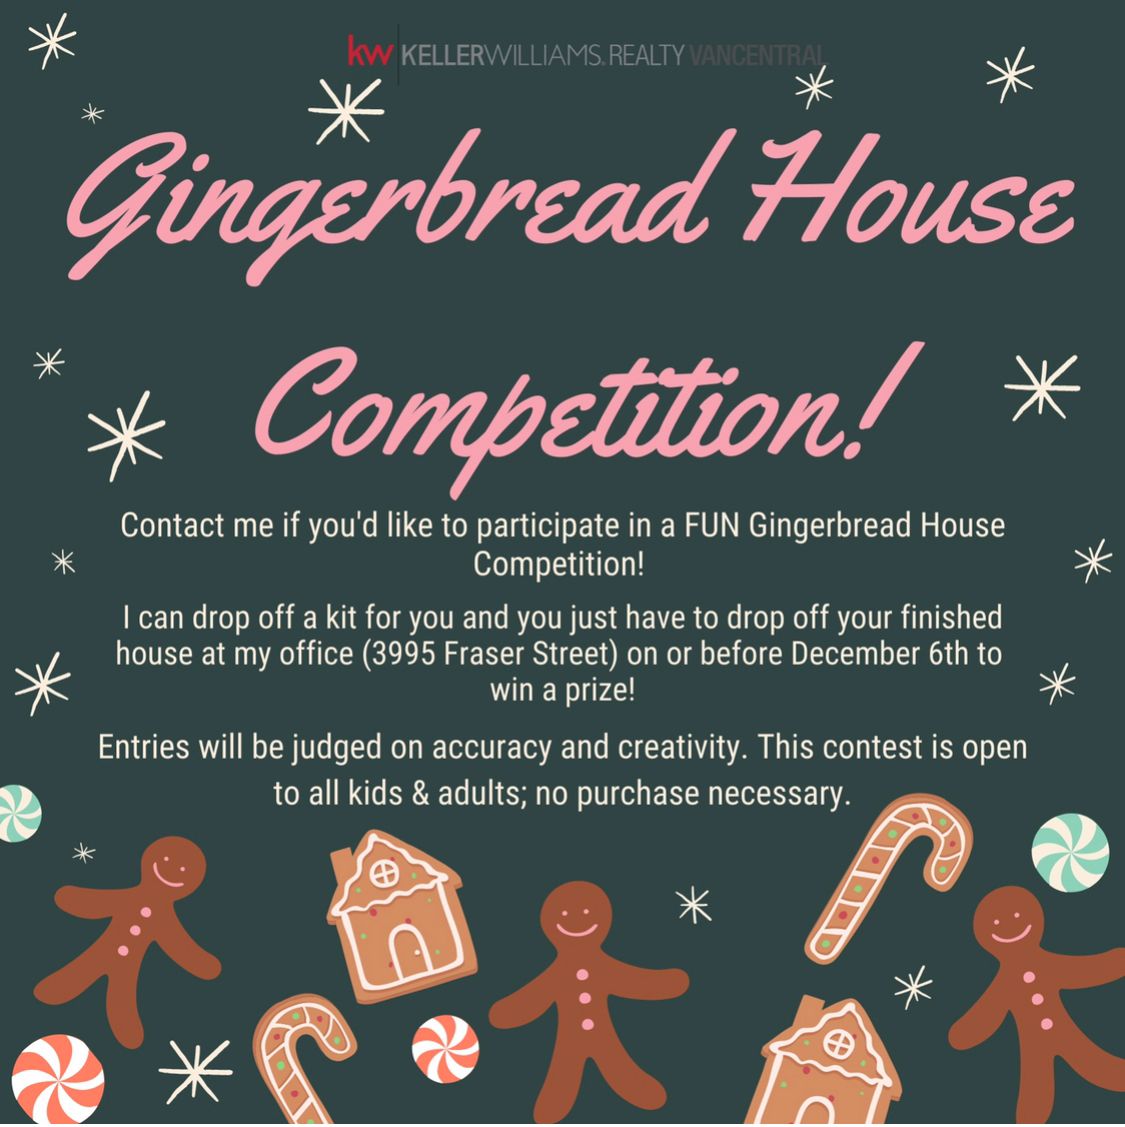 Sharing JOY! with Gingerbread Houses and Holiday Pies